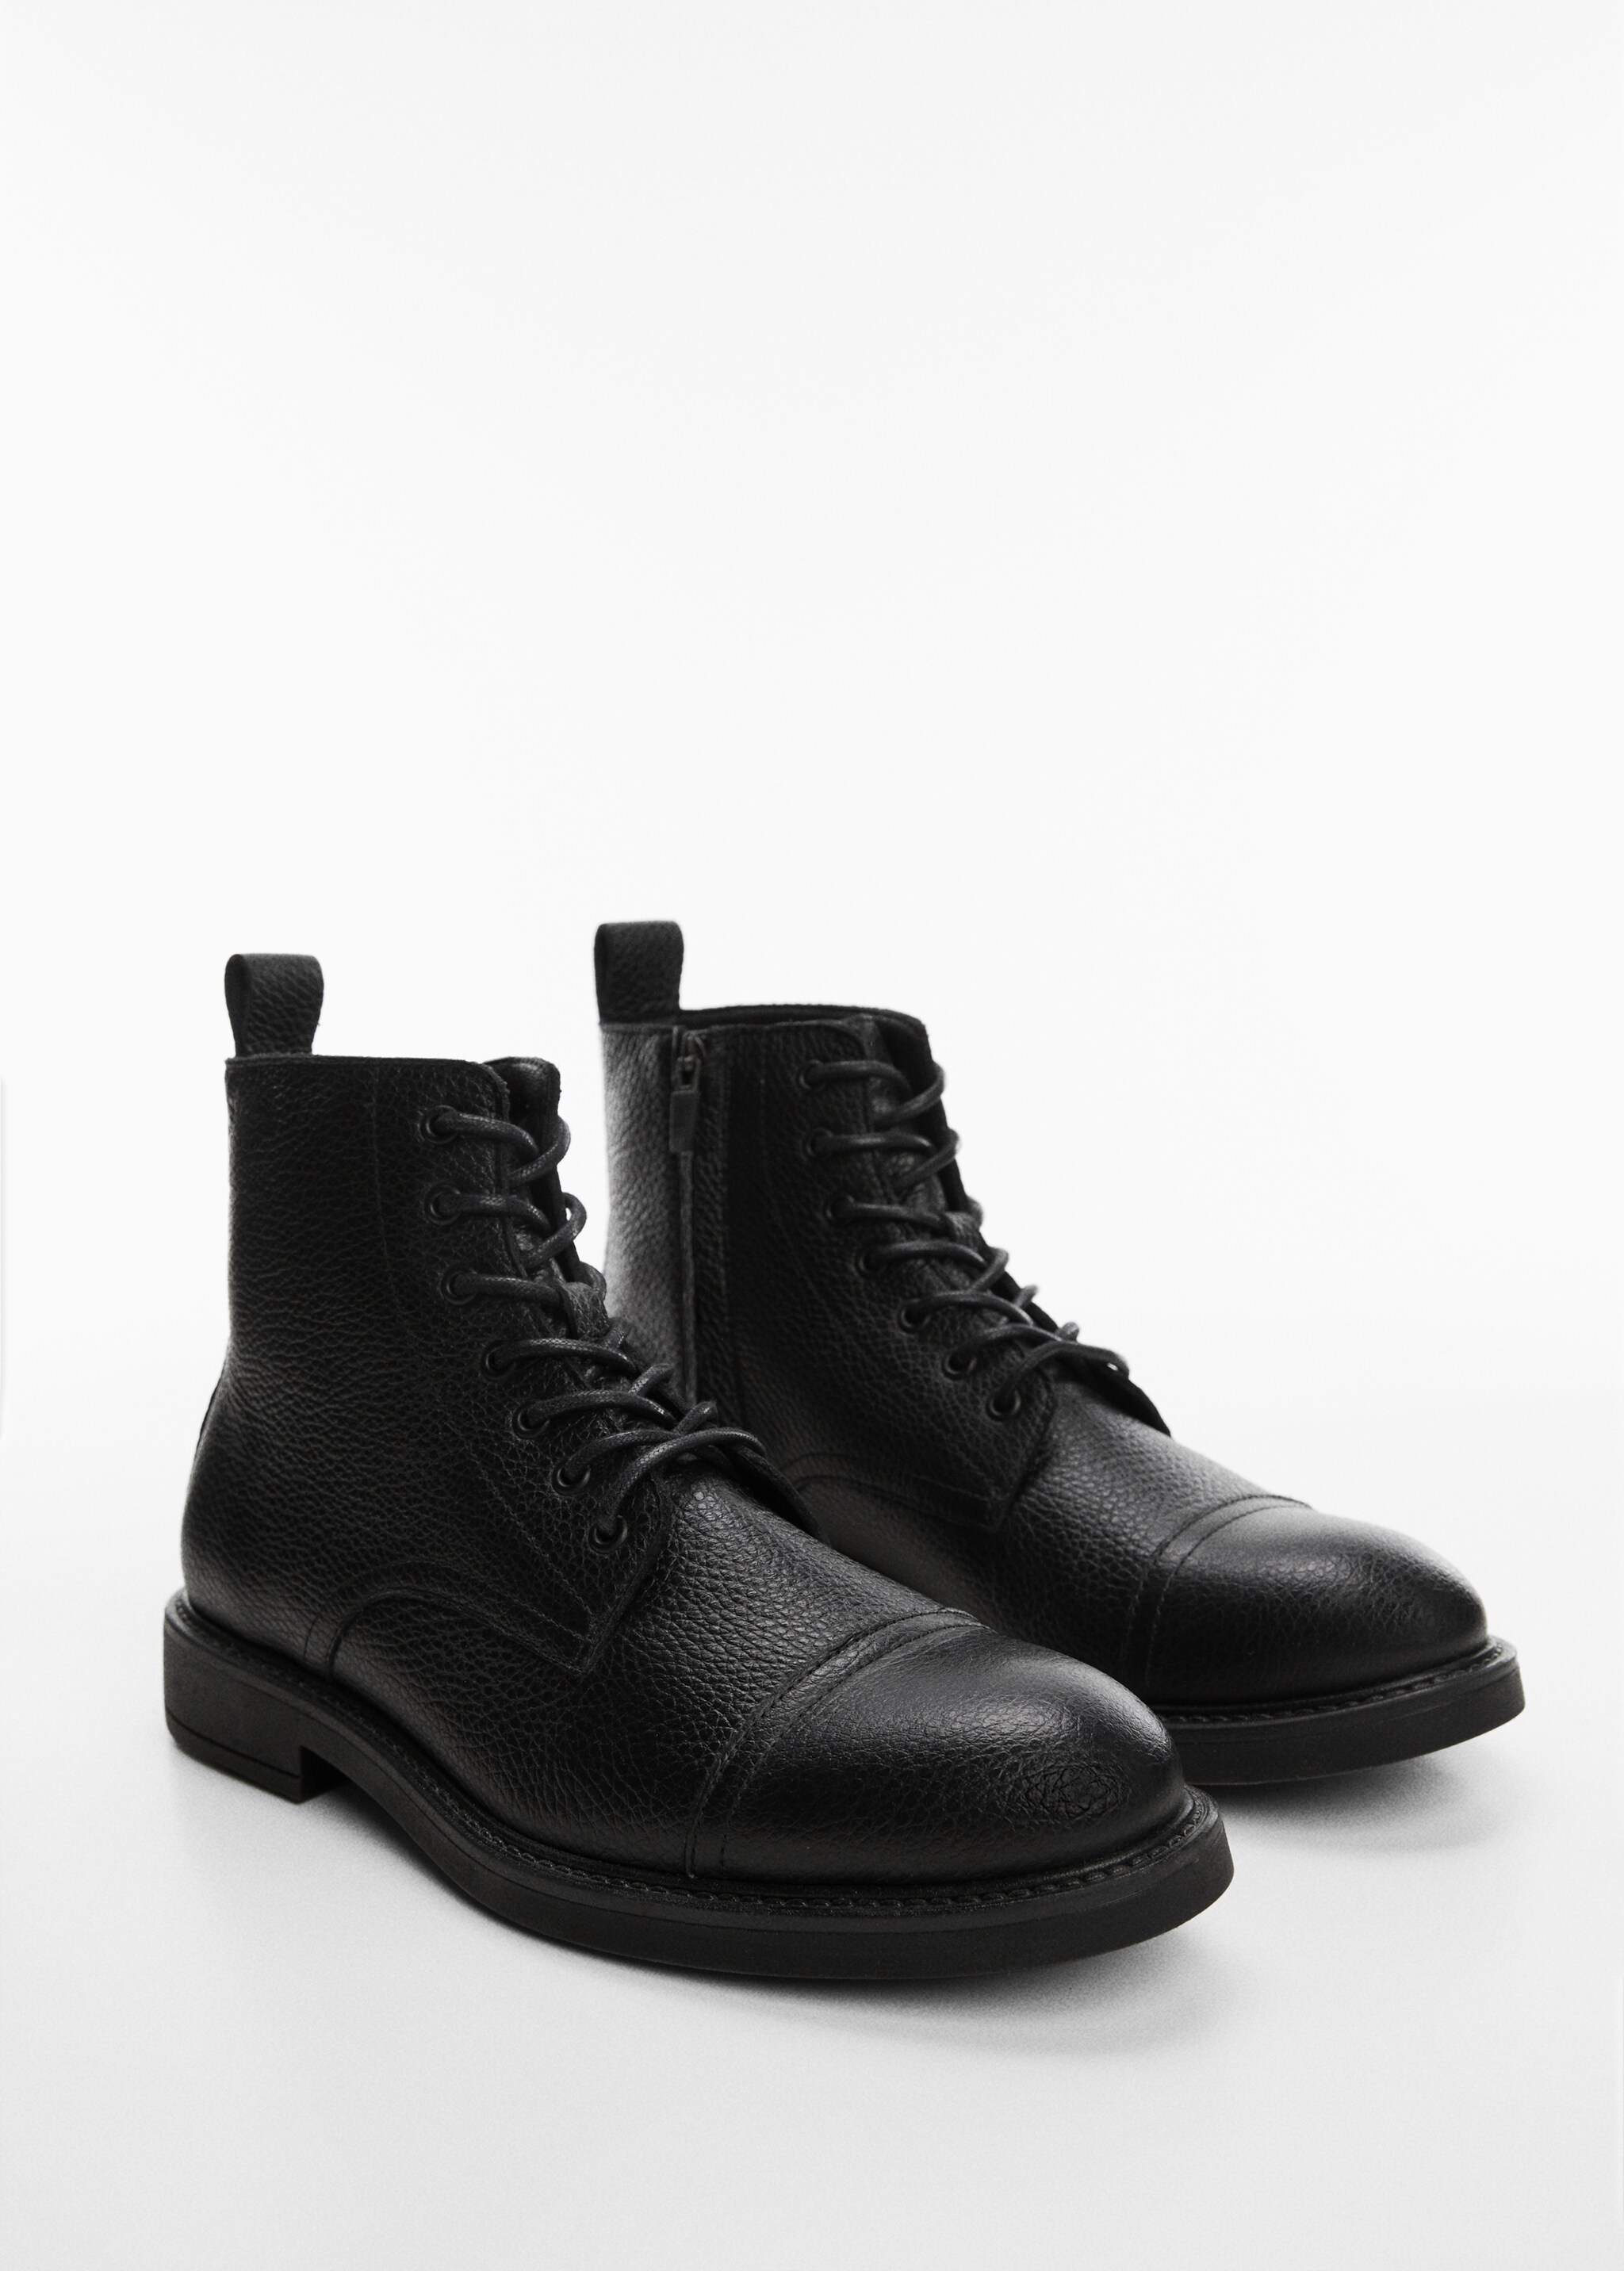 Lace-up leather boots - Plan mediu